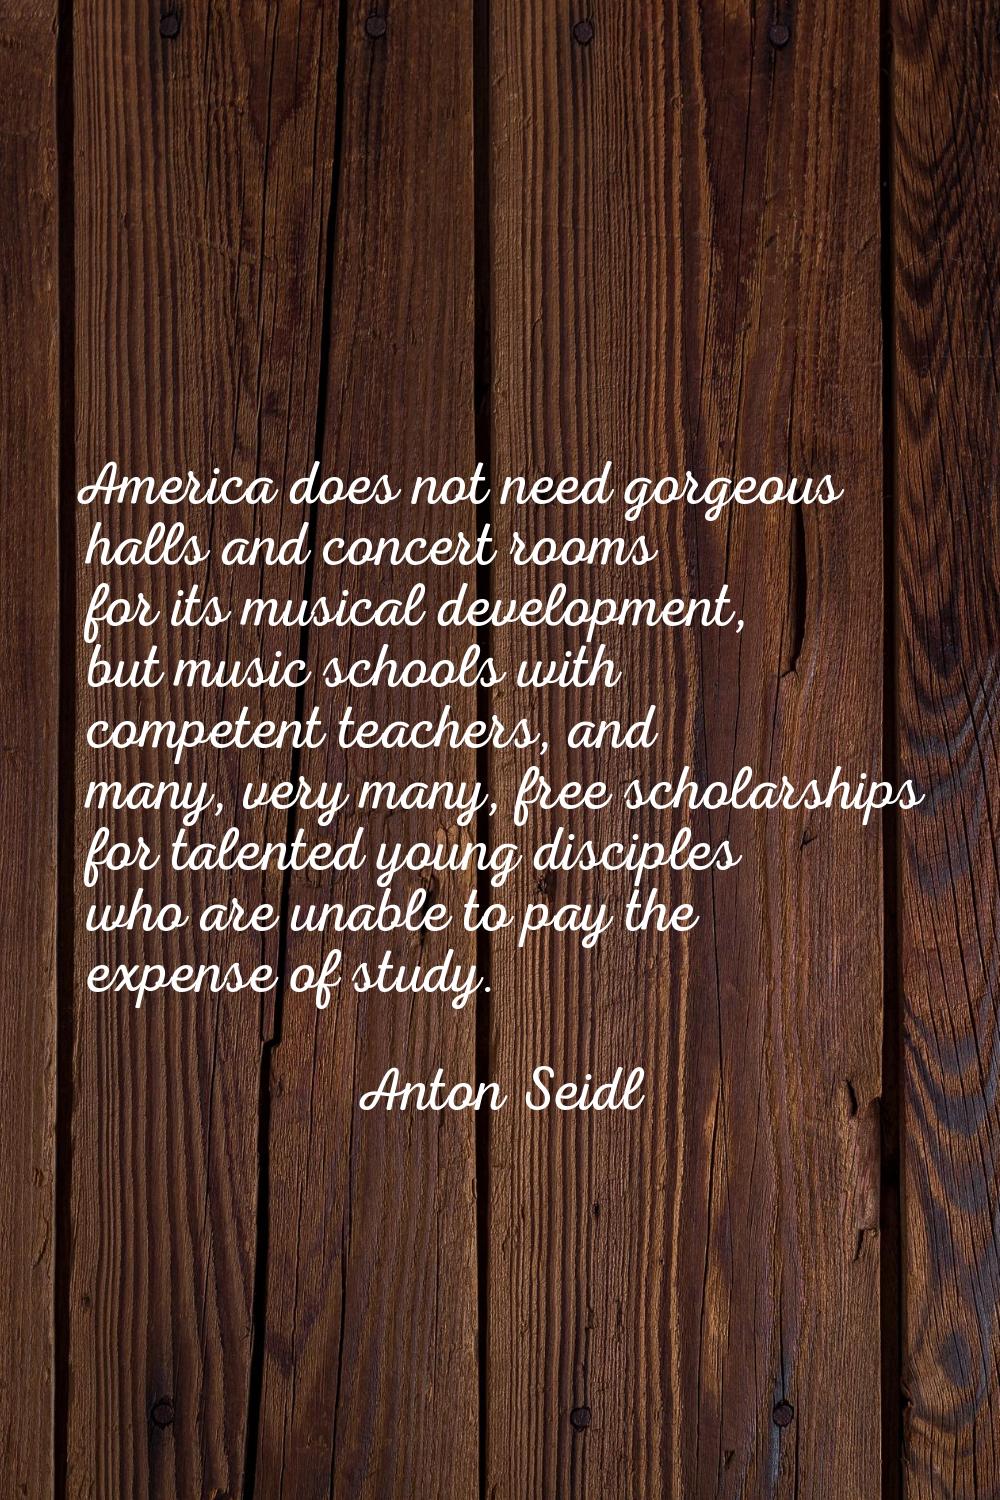 America does not need gorgeous halls and concert rooms for its musical development, but music schoo